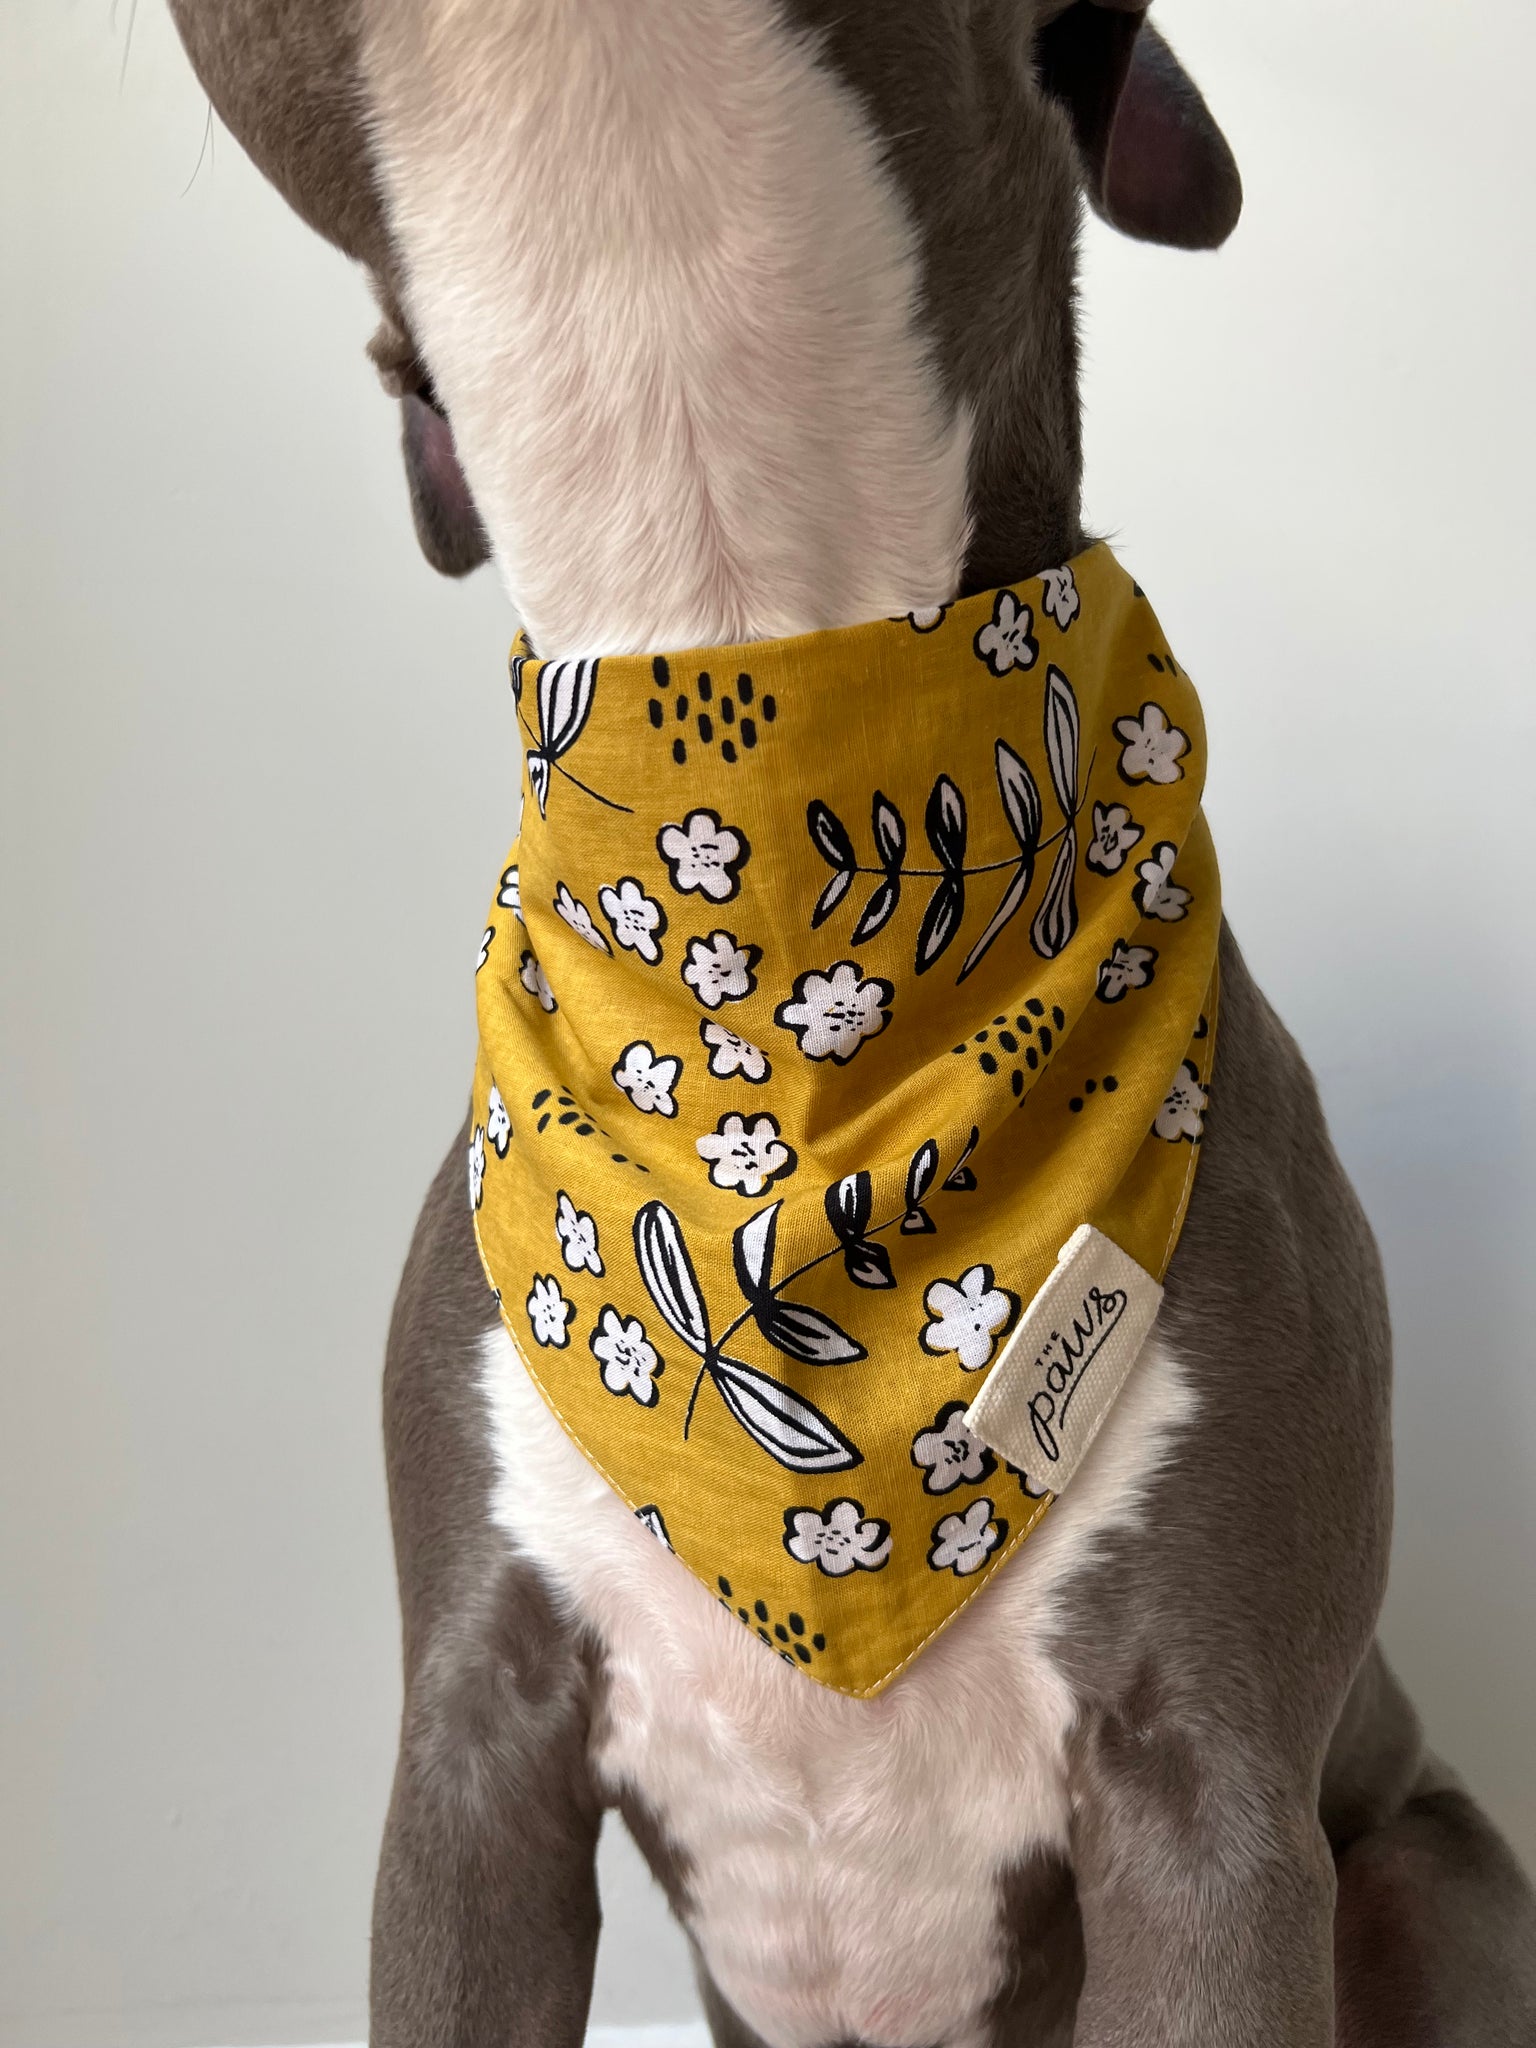 Goldie dog bandana detail - from The Paws